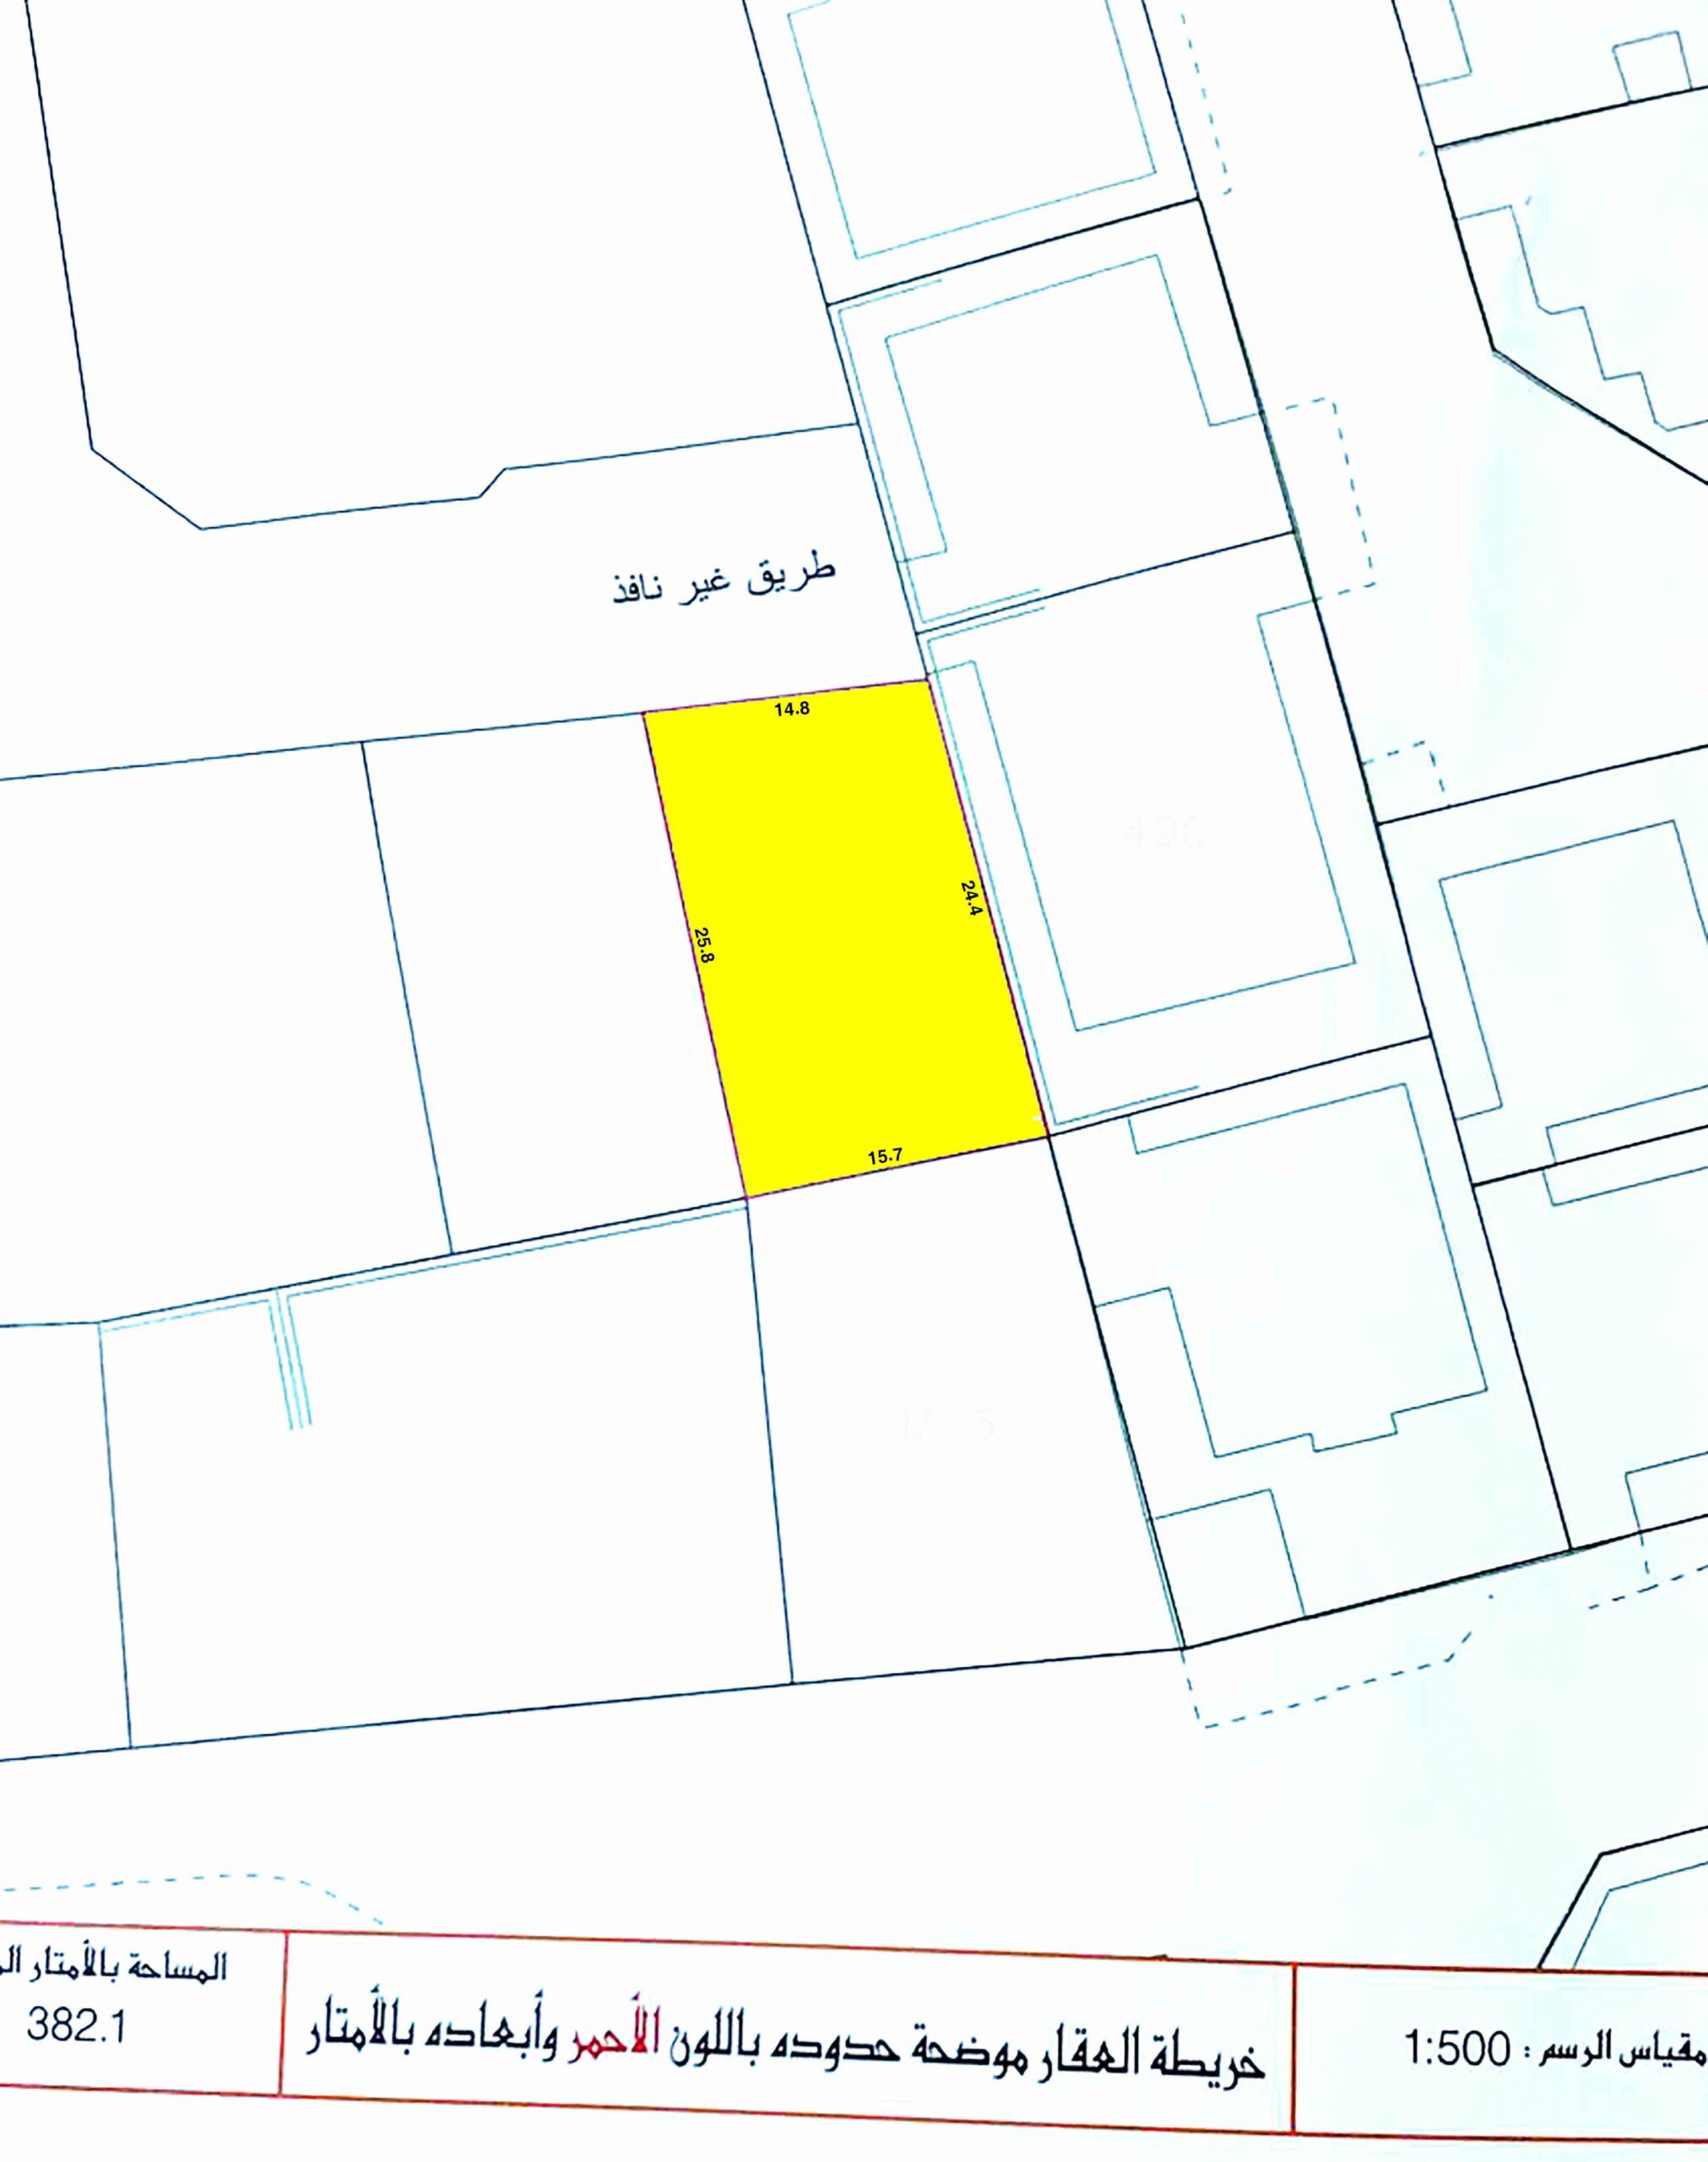 Land for sale RB located in Tubli , land size 382.10 SQM, offered for BD 98,709 /- (Price Negotiable)